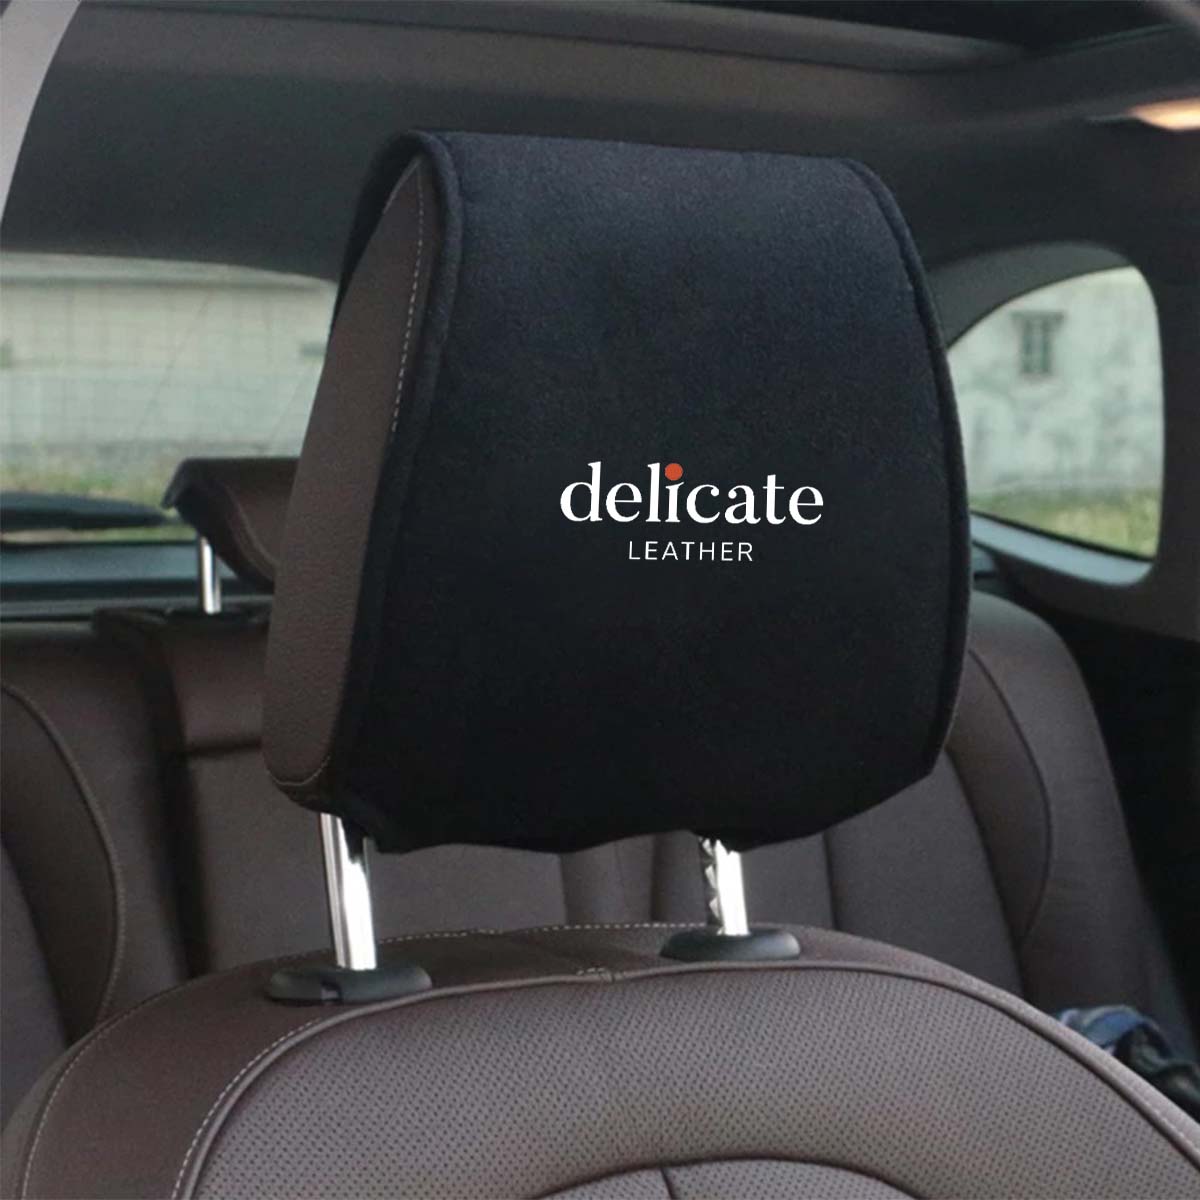 Lincoln Car Seat Headrest Cover: Stylish Protection for Your Vehicle's Headrests